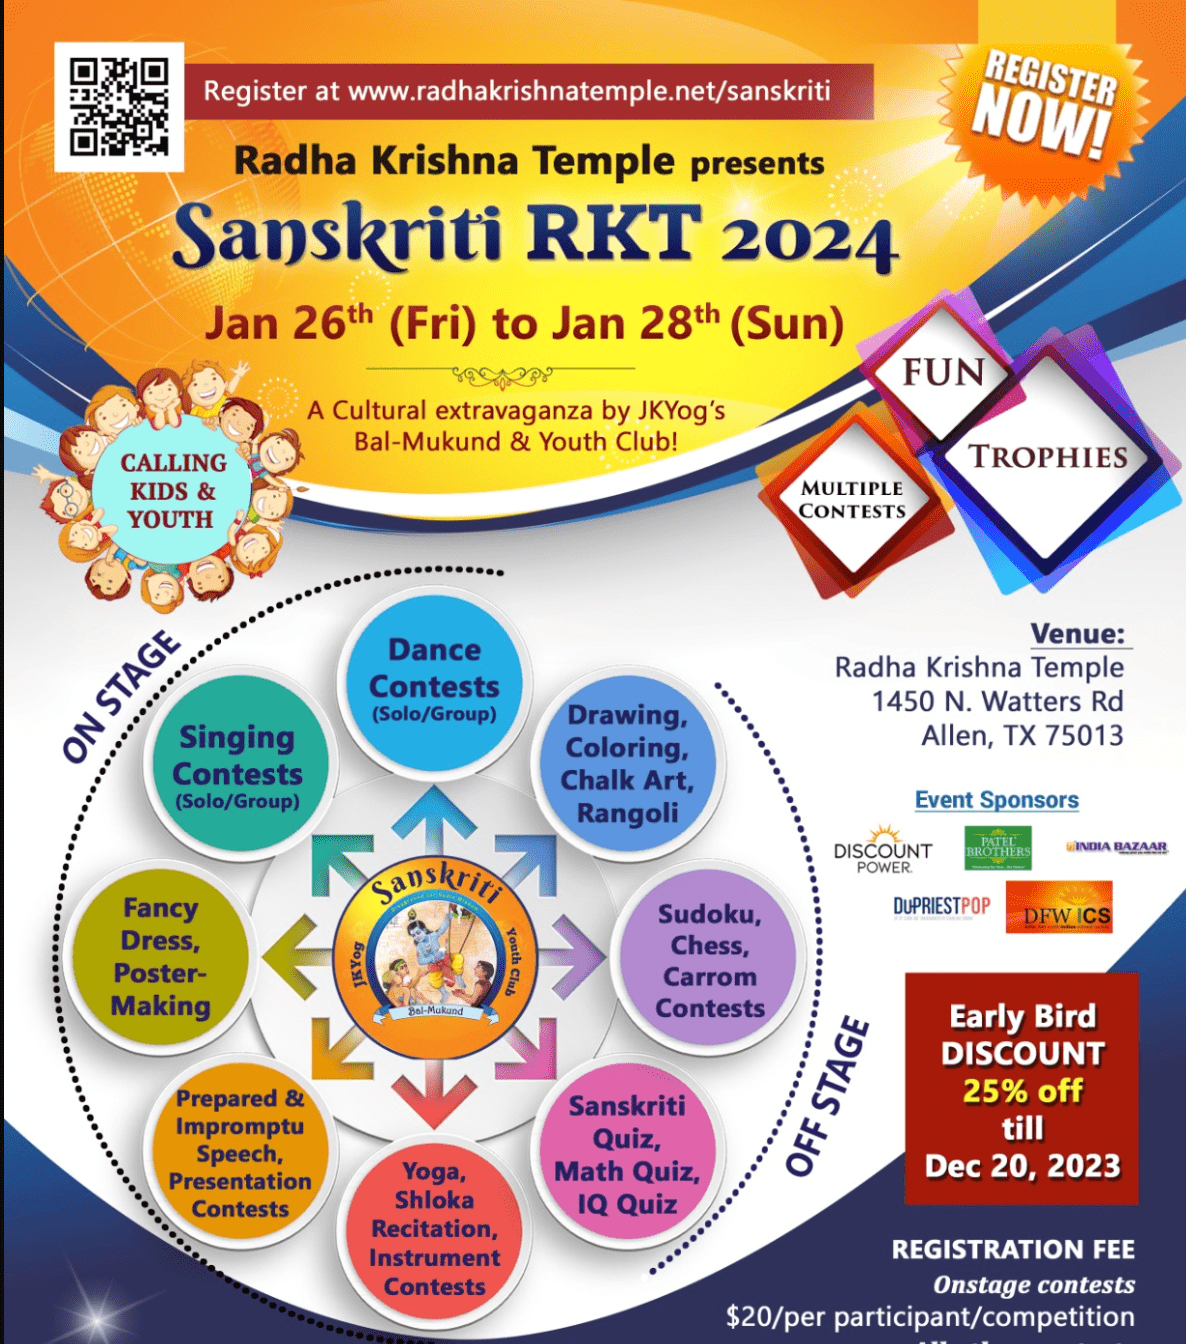 Sanskriti Contests for Children & Youth